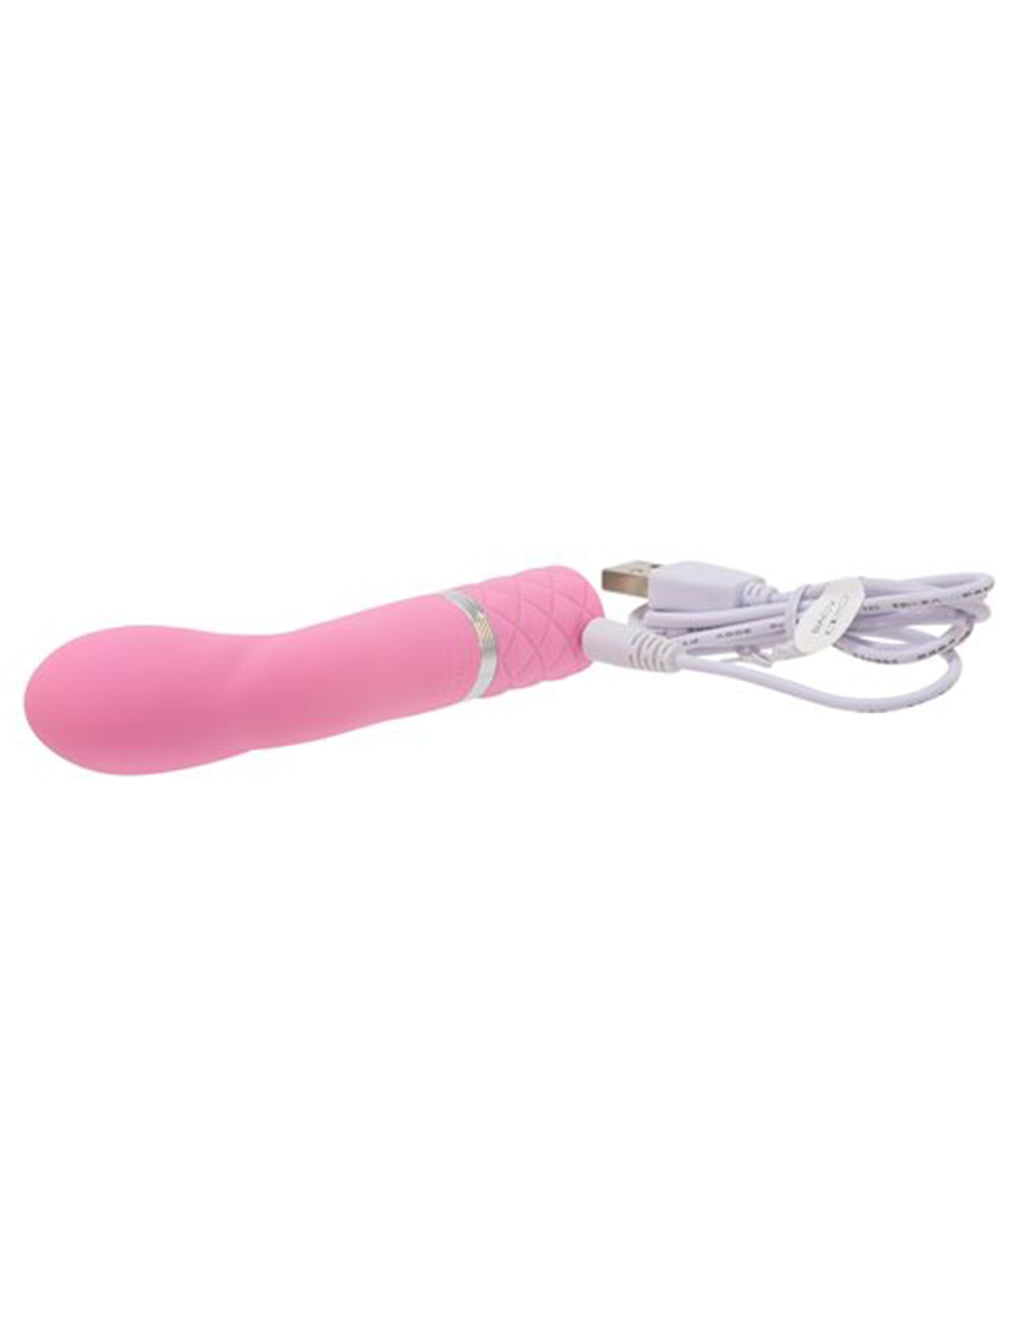 Pillow Talk Racy- Pink- Charger